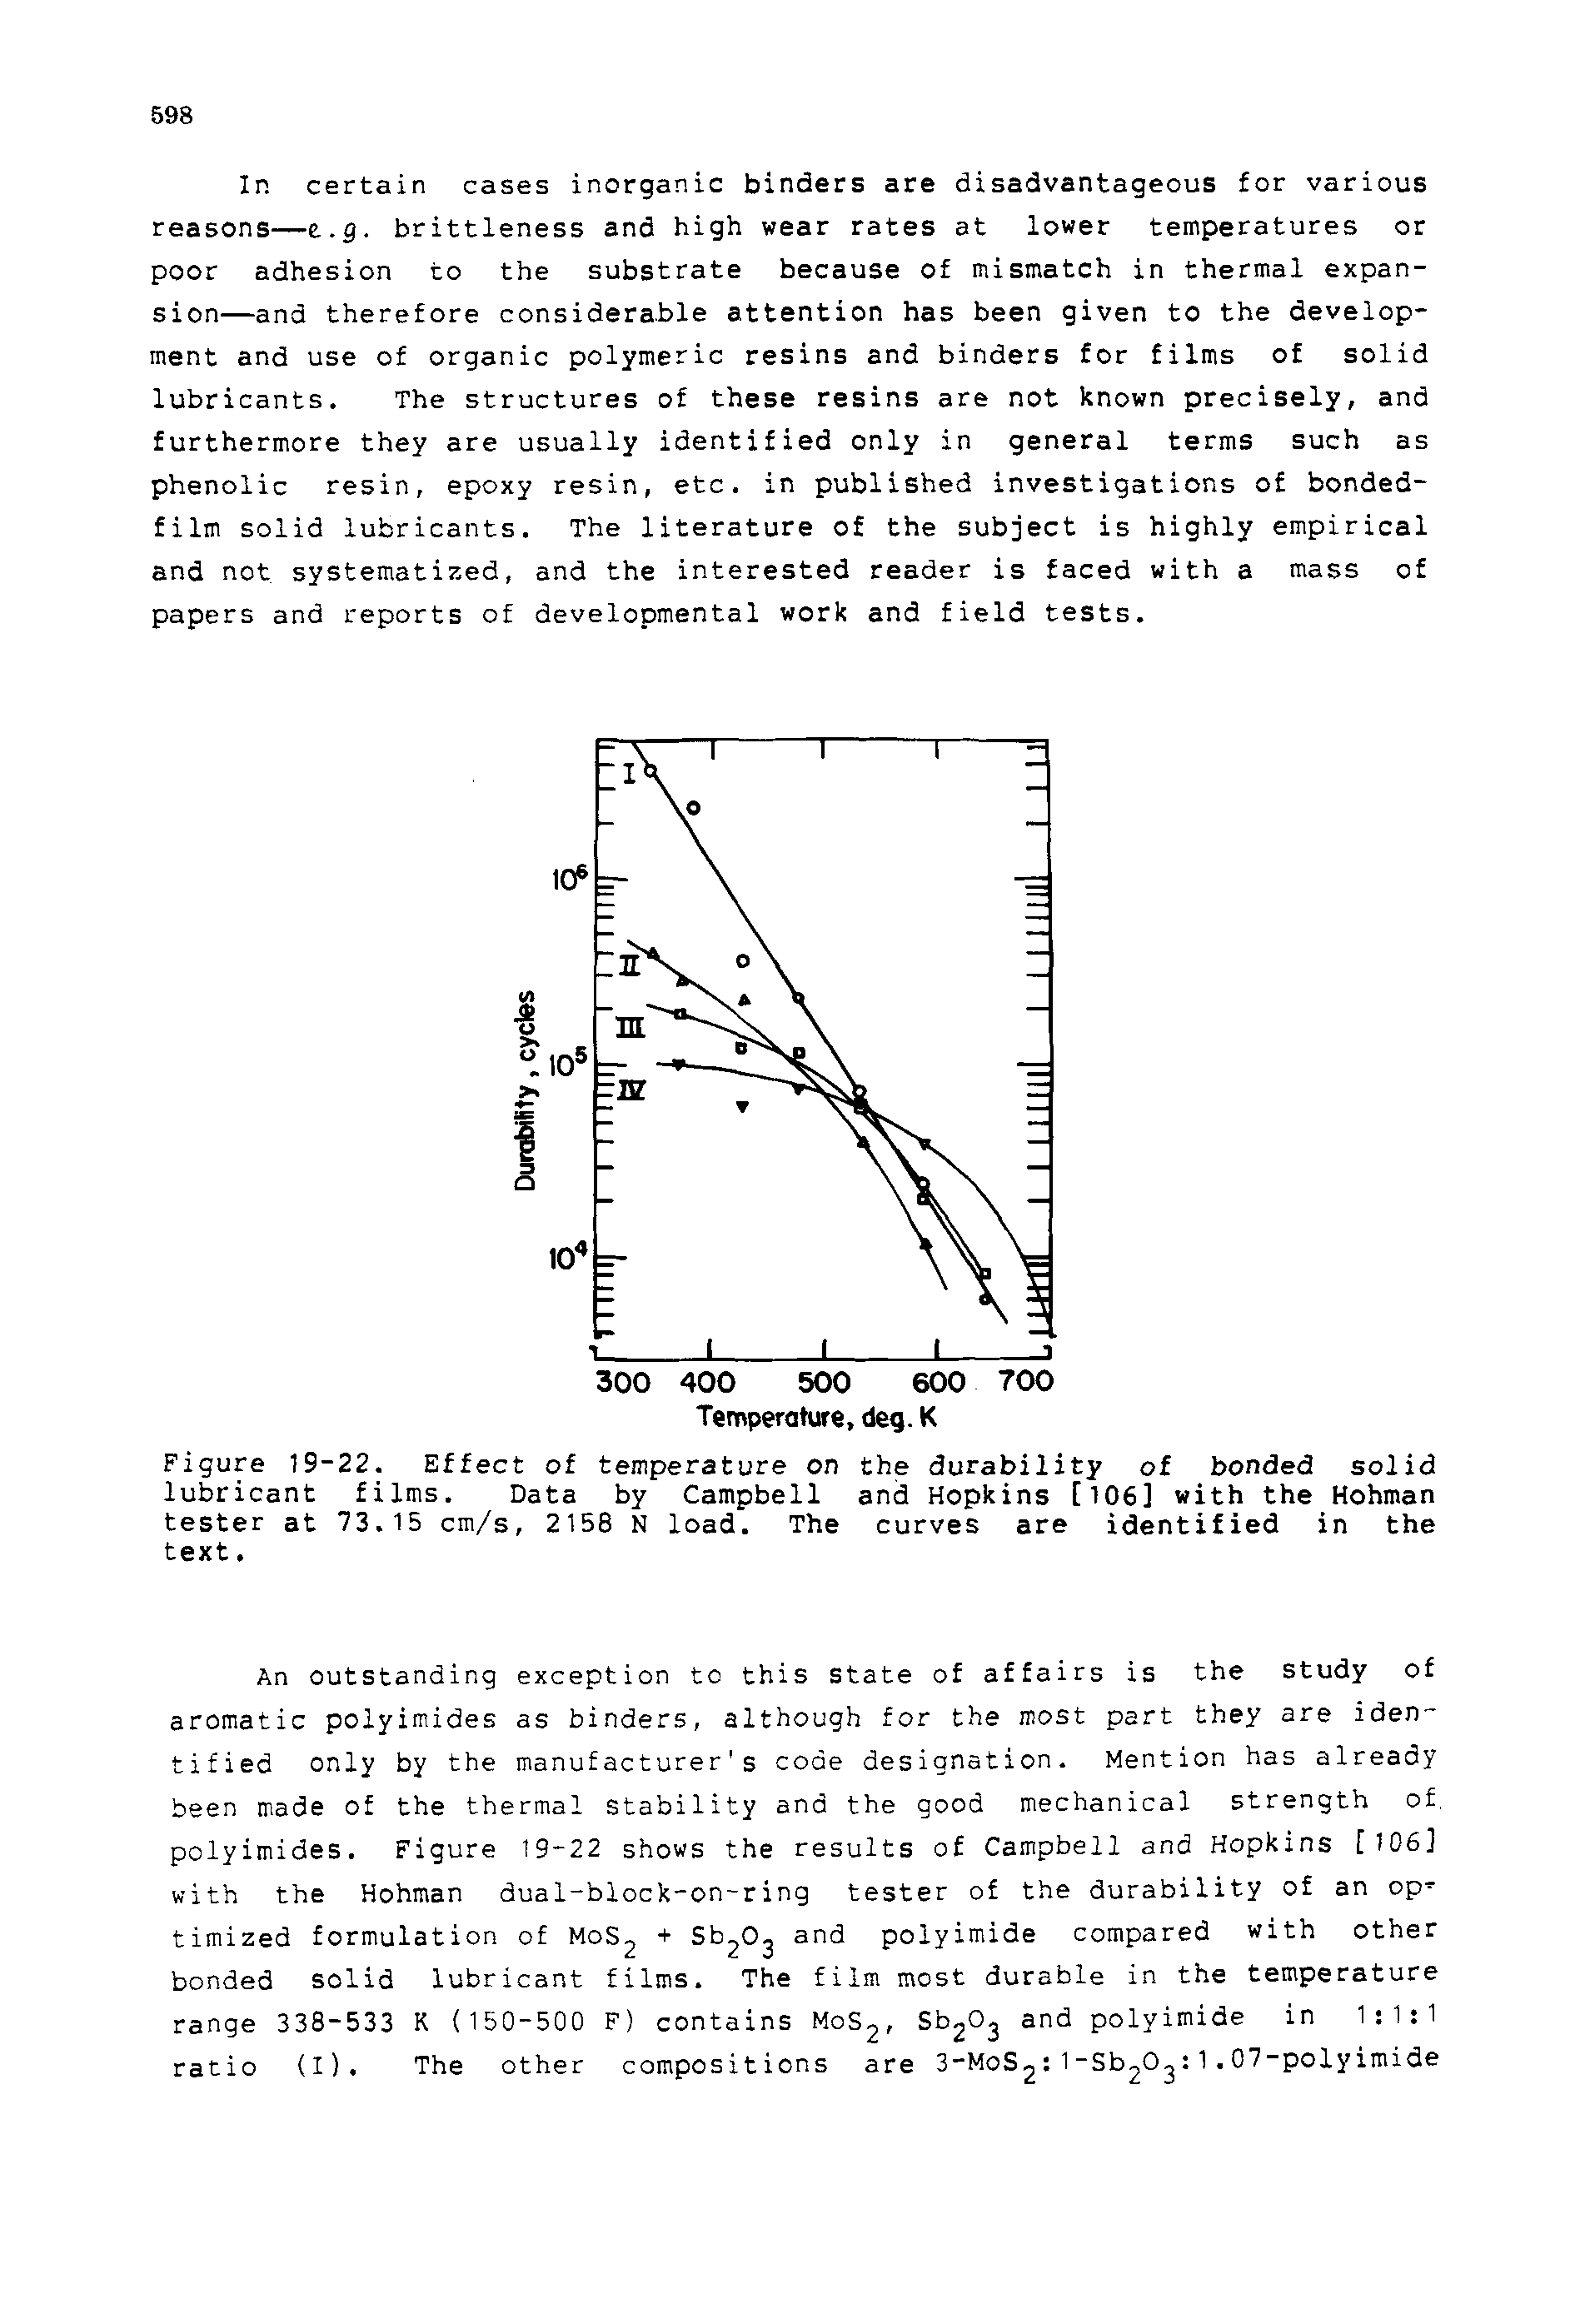 Figure 19-22. Effect of temperature on the durability of bonded solid lubricant films. Data by Campbell and Hopkins [106] with the Hohman tester at 73.15 cm/s, 2158 N load. The curves are identified in the text.